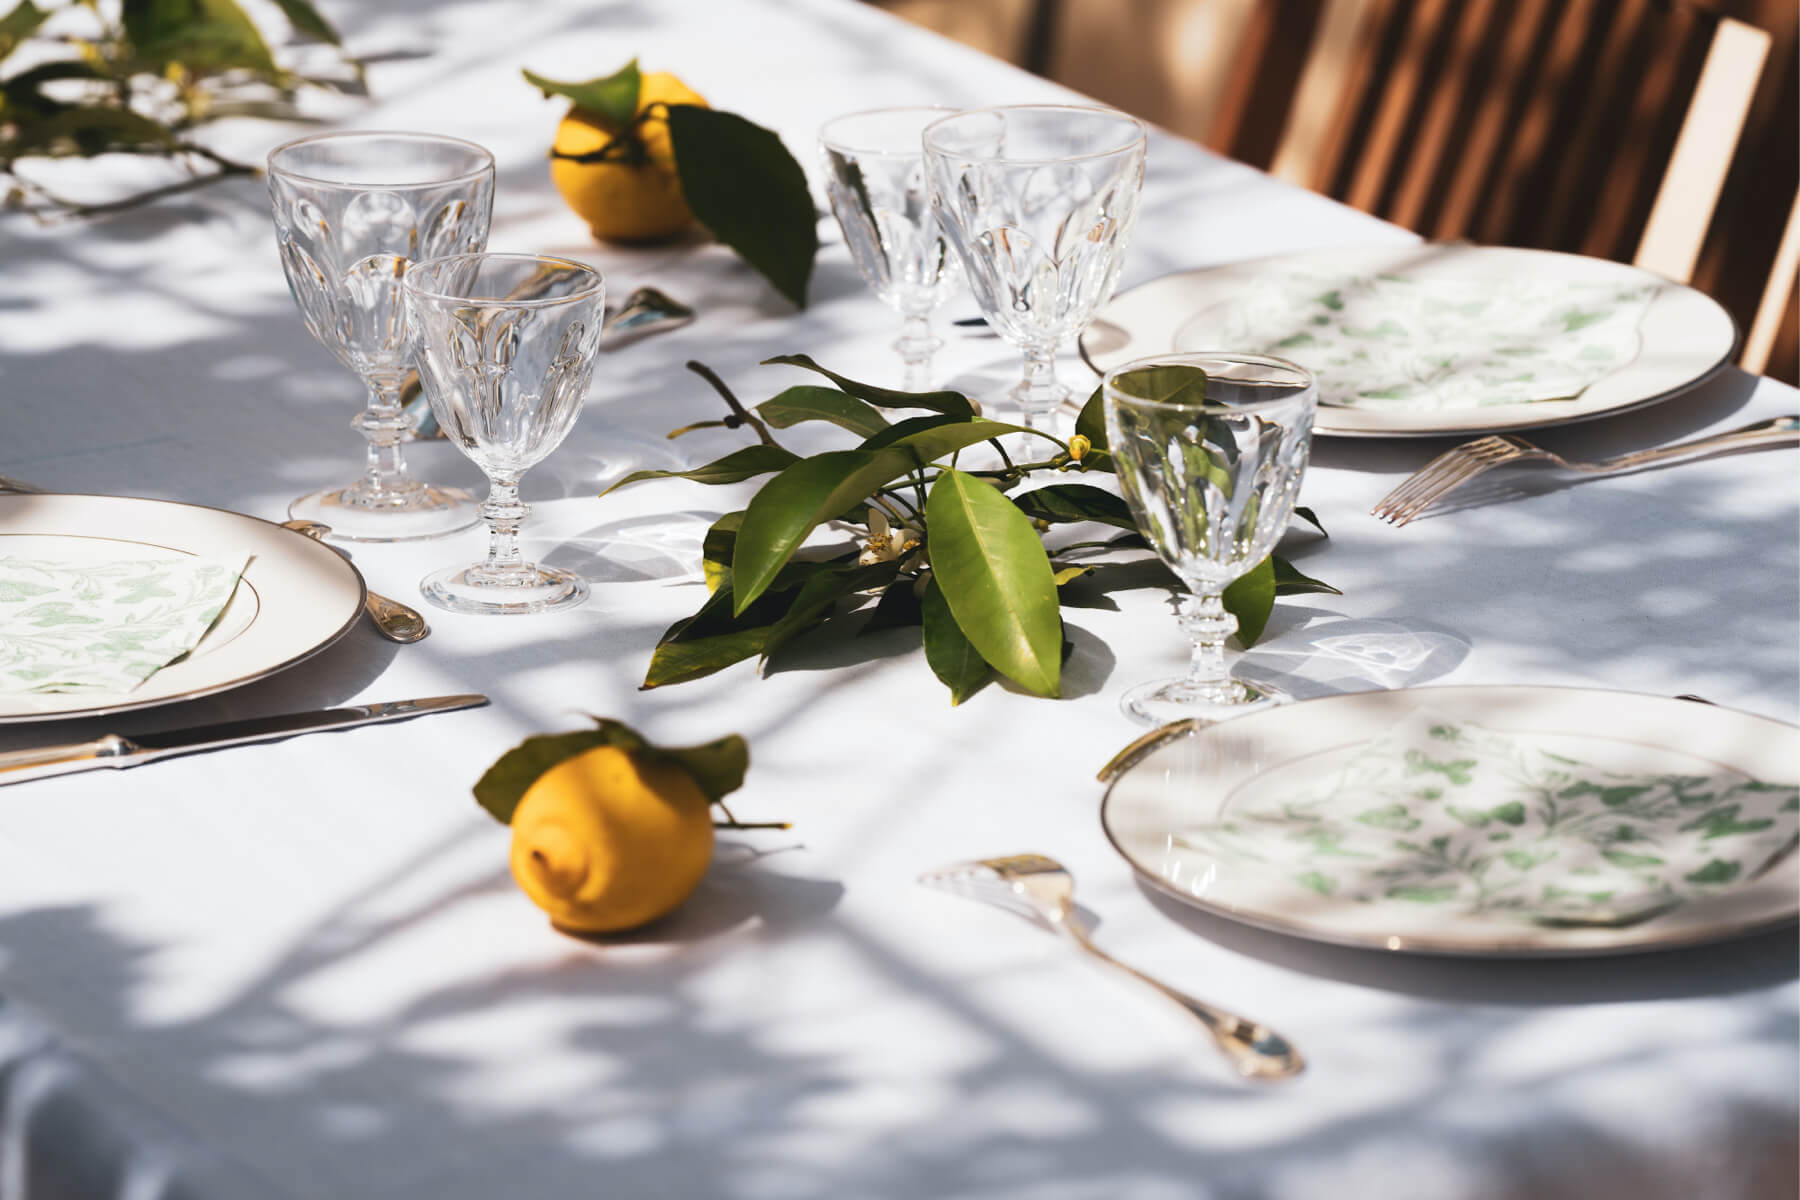 Table settings with lemons, crystal stemware, and white plates.